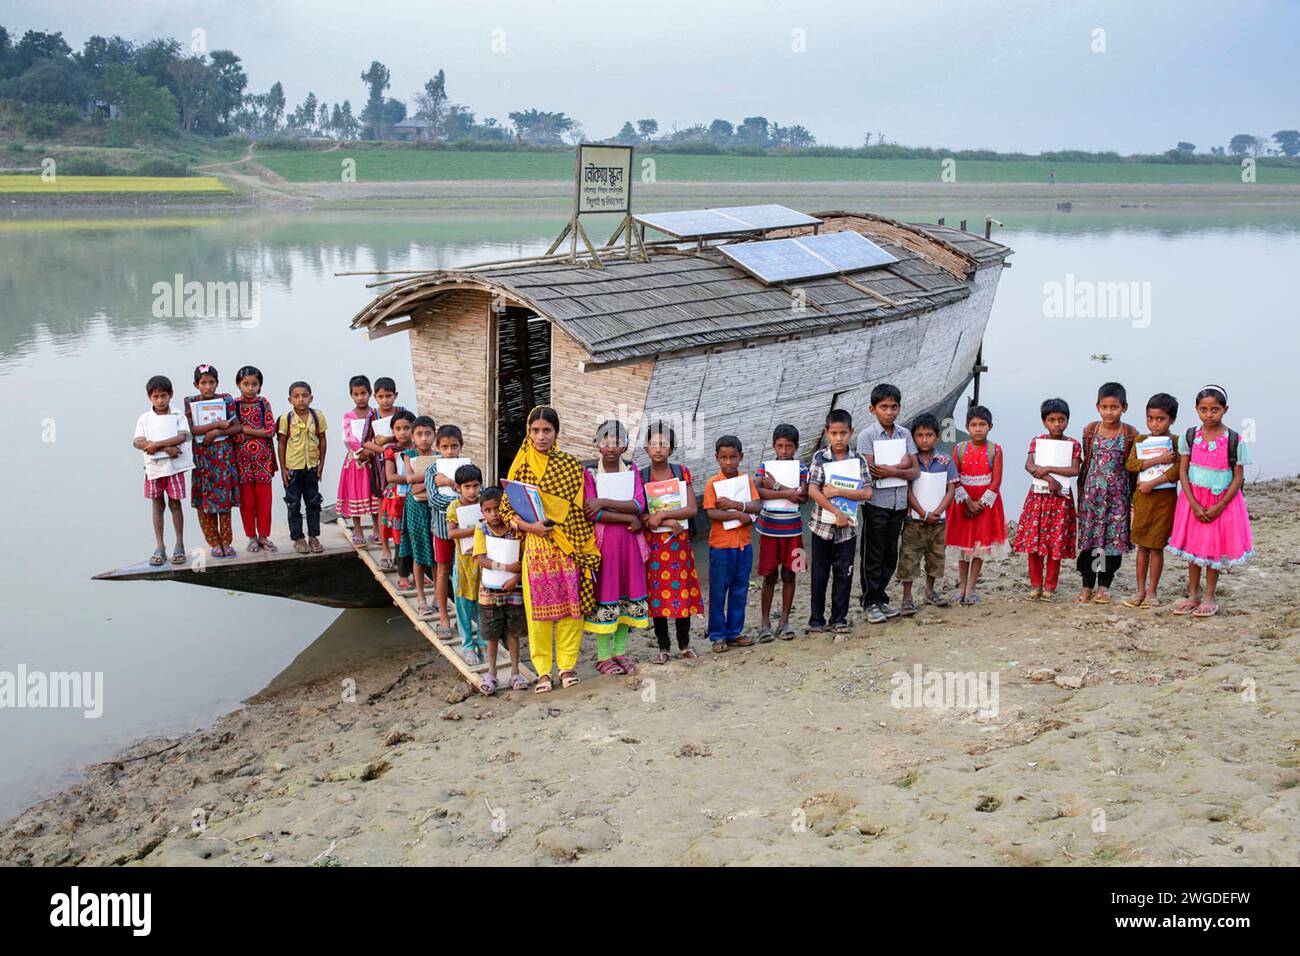 Students of class III, pose for a group photo after the end of the classes in front of the Horondarpur Boat School. The country had floods twice in 2007 and 332 schools destroyed and 4,893 schools were damaged. Shidhulai operates a fleet of floating schools, libraries, health clinics, solar workshops and floating training centres with wireless internet access, serving close to 97,000 families in flood-prone regions. Boats themselves are outfitted with solar panels that power computers, lights and medical equipment. Horondarpur, B L Bari Faridpur, Pabna, Bangladesh. Stock Photo